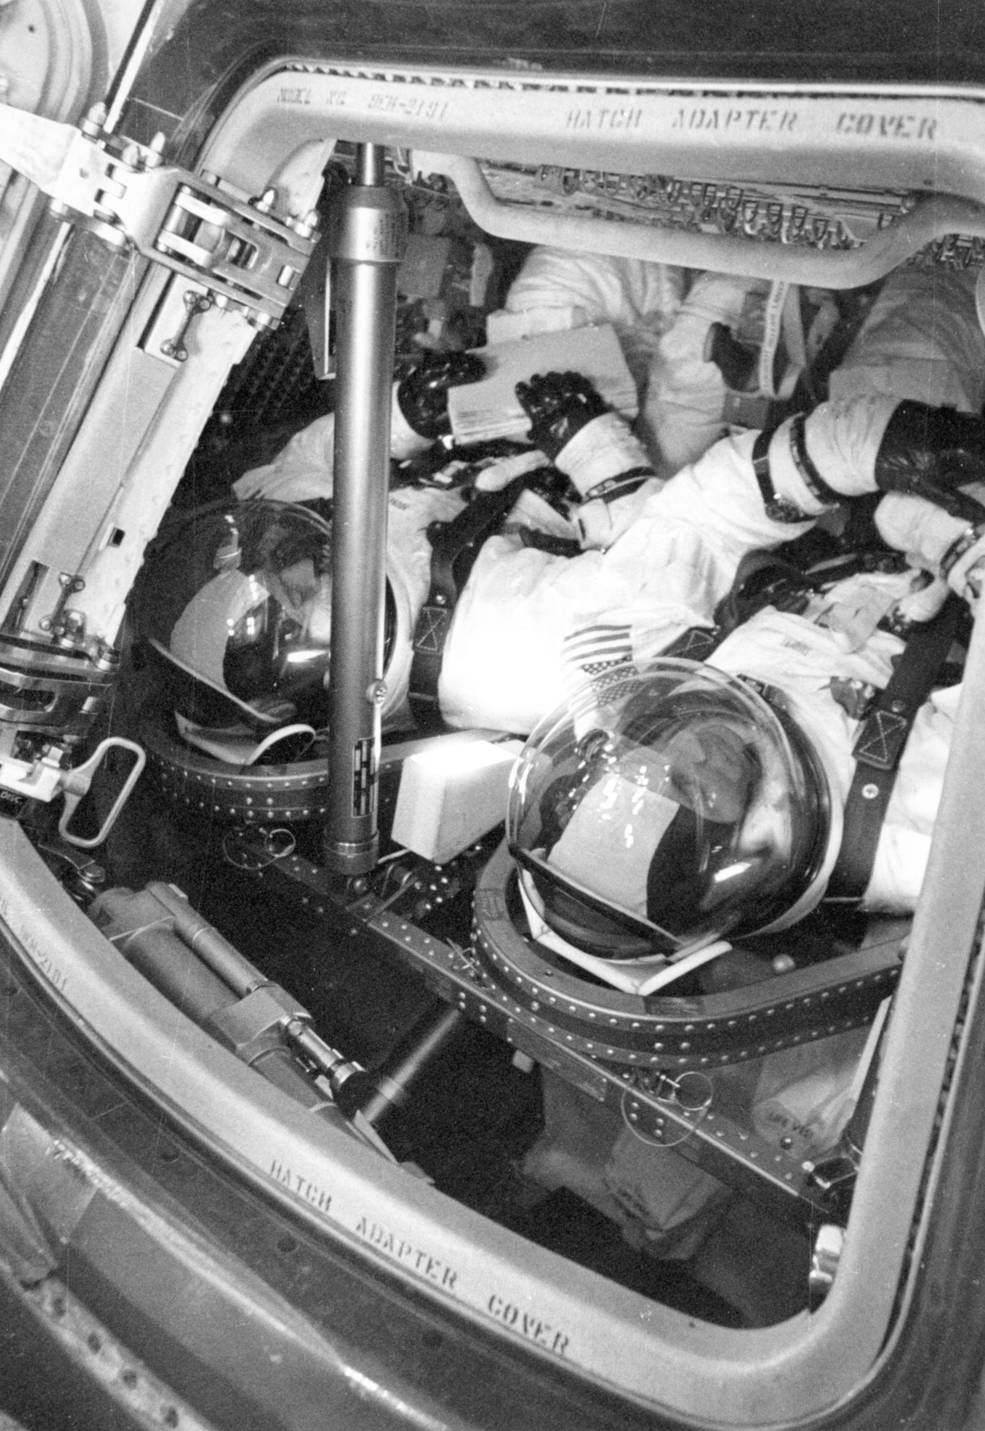 apollo_13_cm_alt_chamber_test_young_and_swigert_aug_29_1969